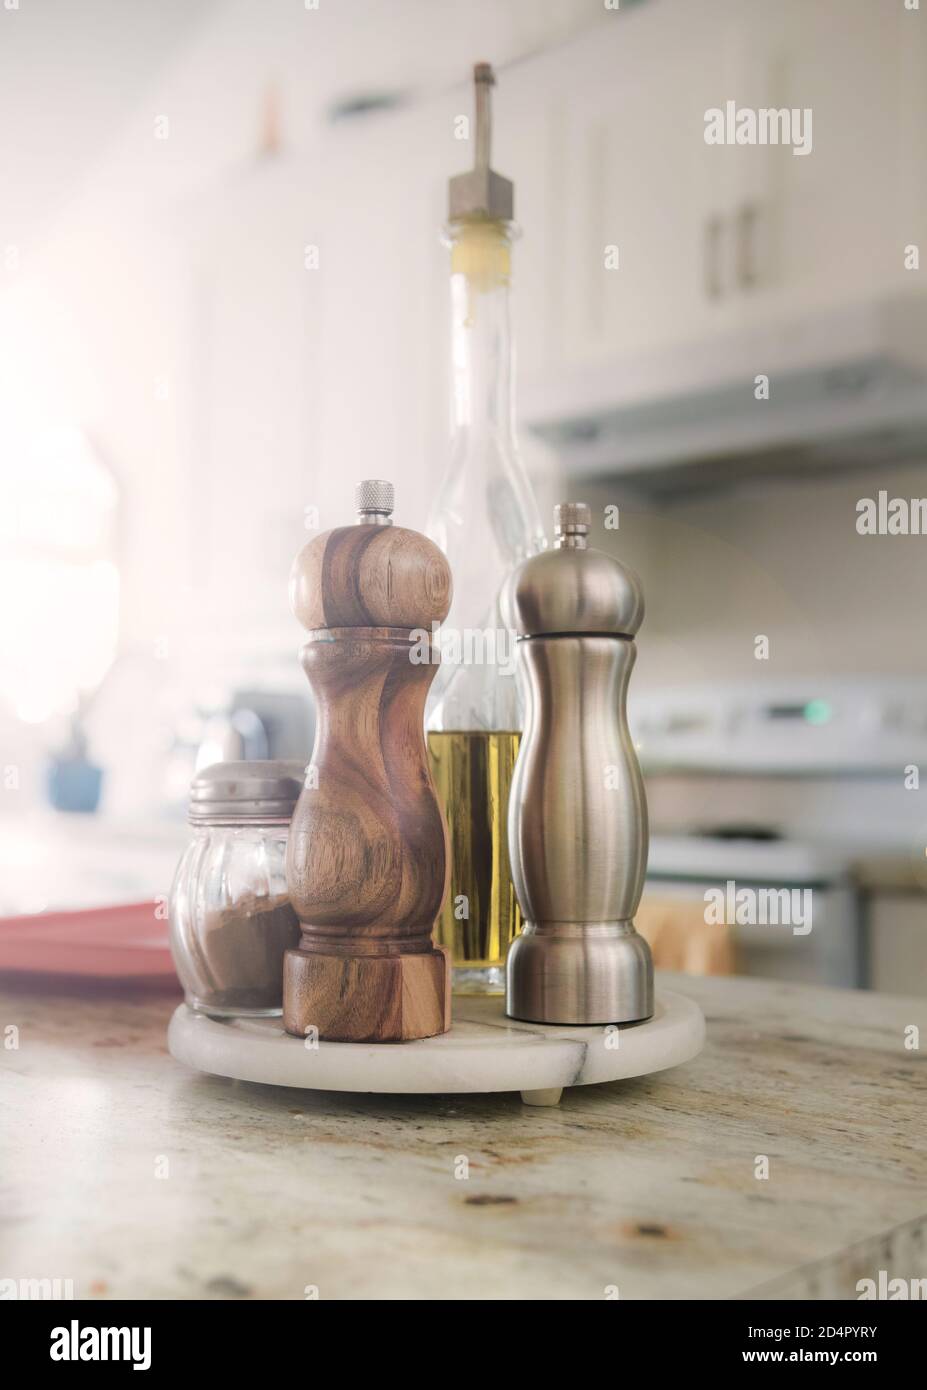 https://c8.alamy.com/comp/2D4PYRY/on-the-kitchen-counter-there-is-salt-pepper-cinnamon-and-olive-oil-a-stainless-steel-salt-mill-and-a-wooden-pepper-mill-2D4PYRY.jpg